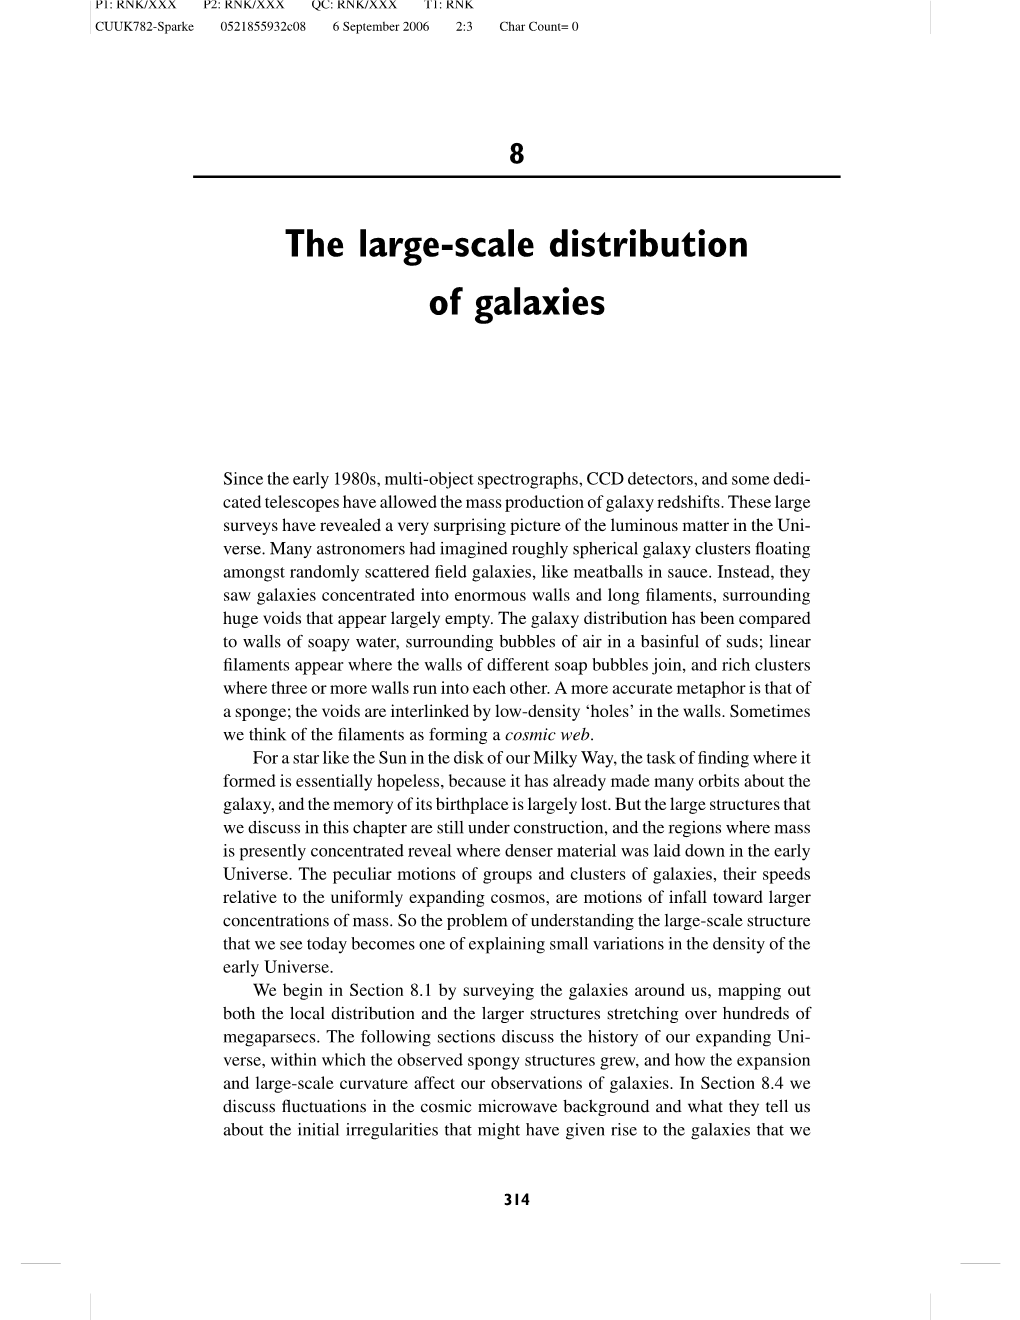 The Large-Scale Distribution of Galaxies